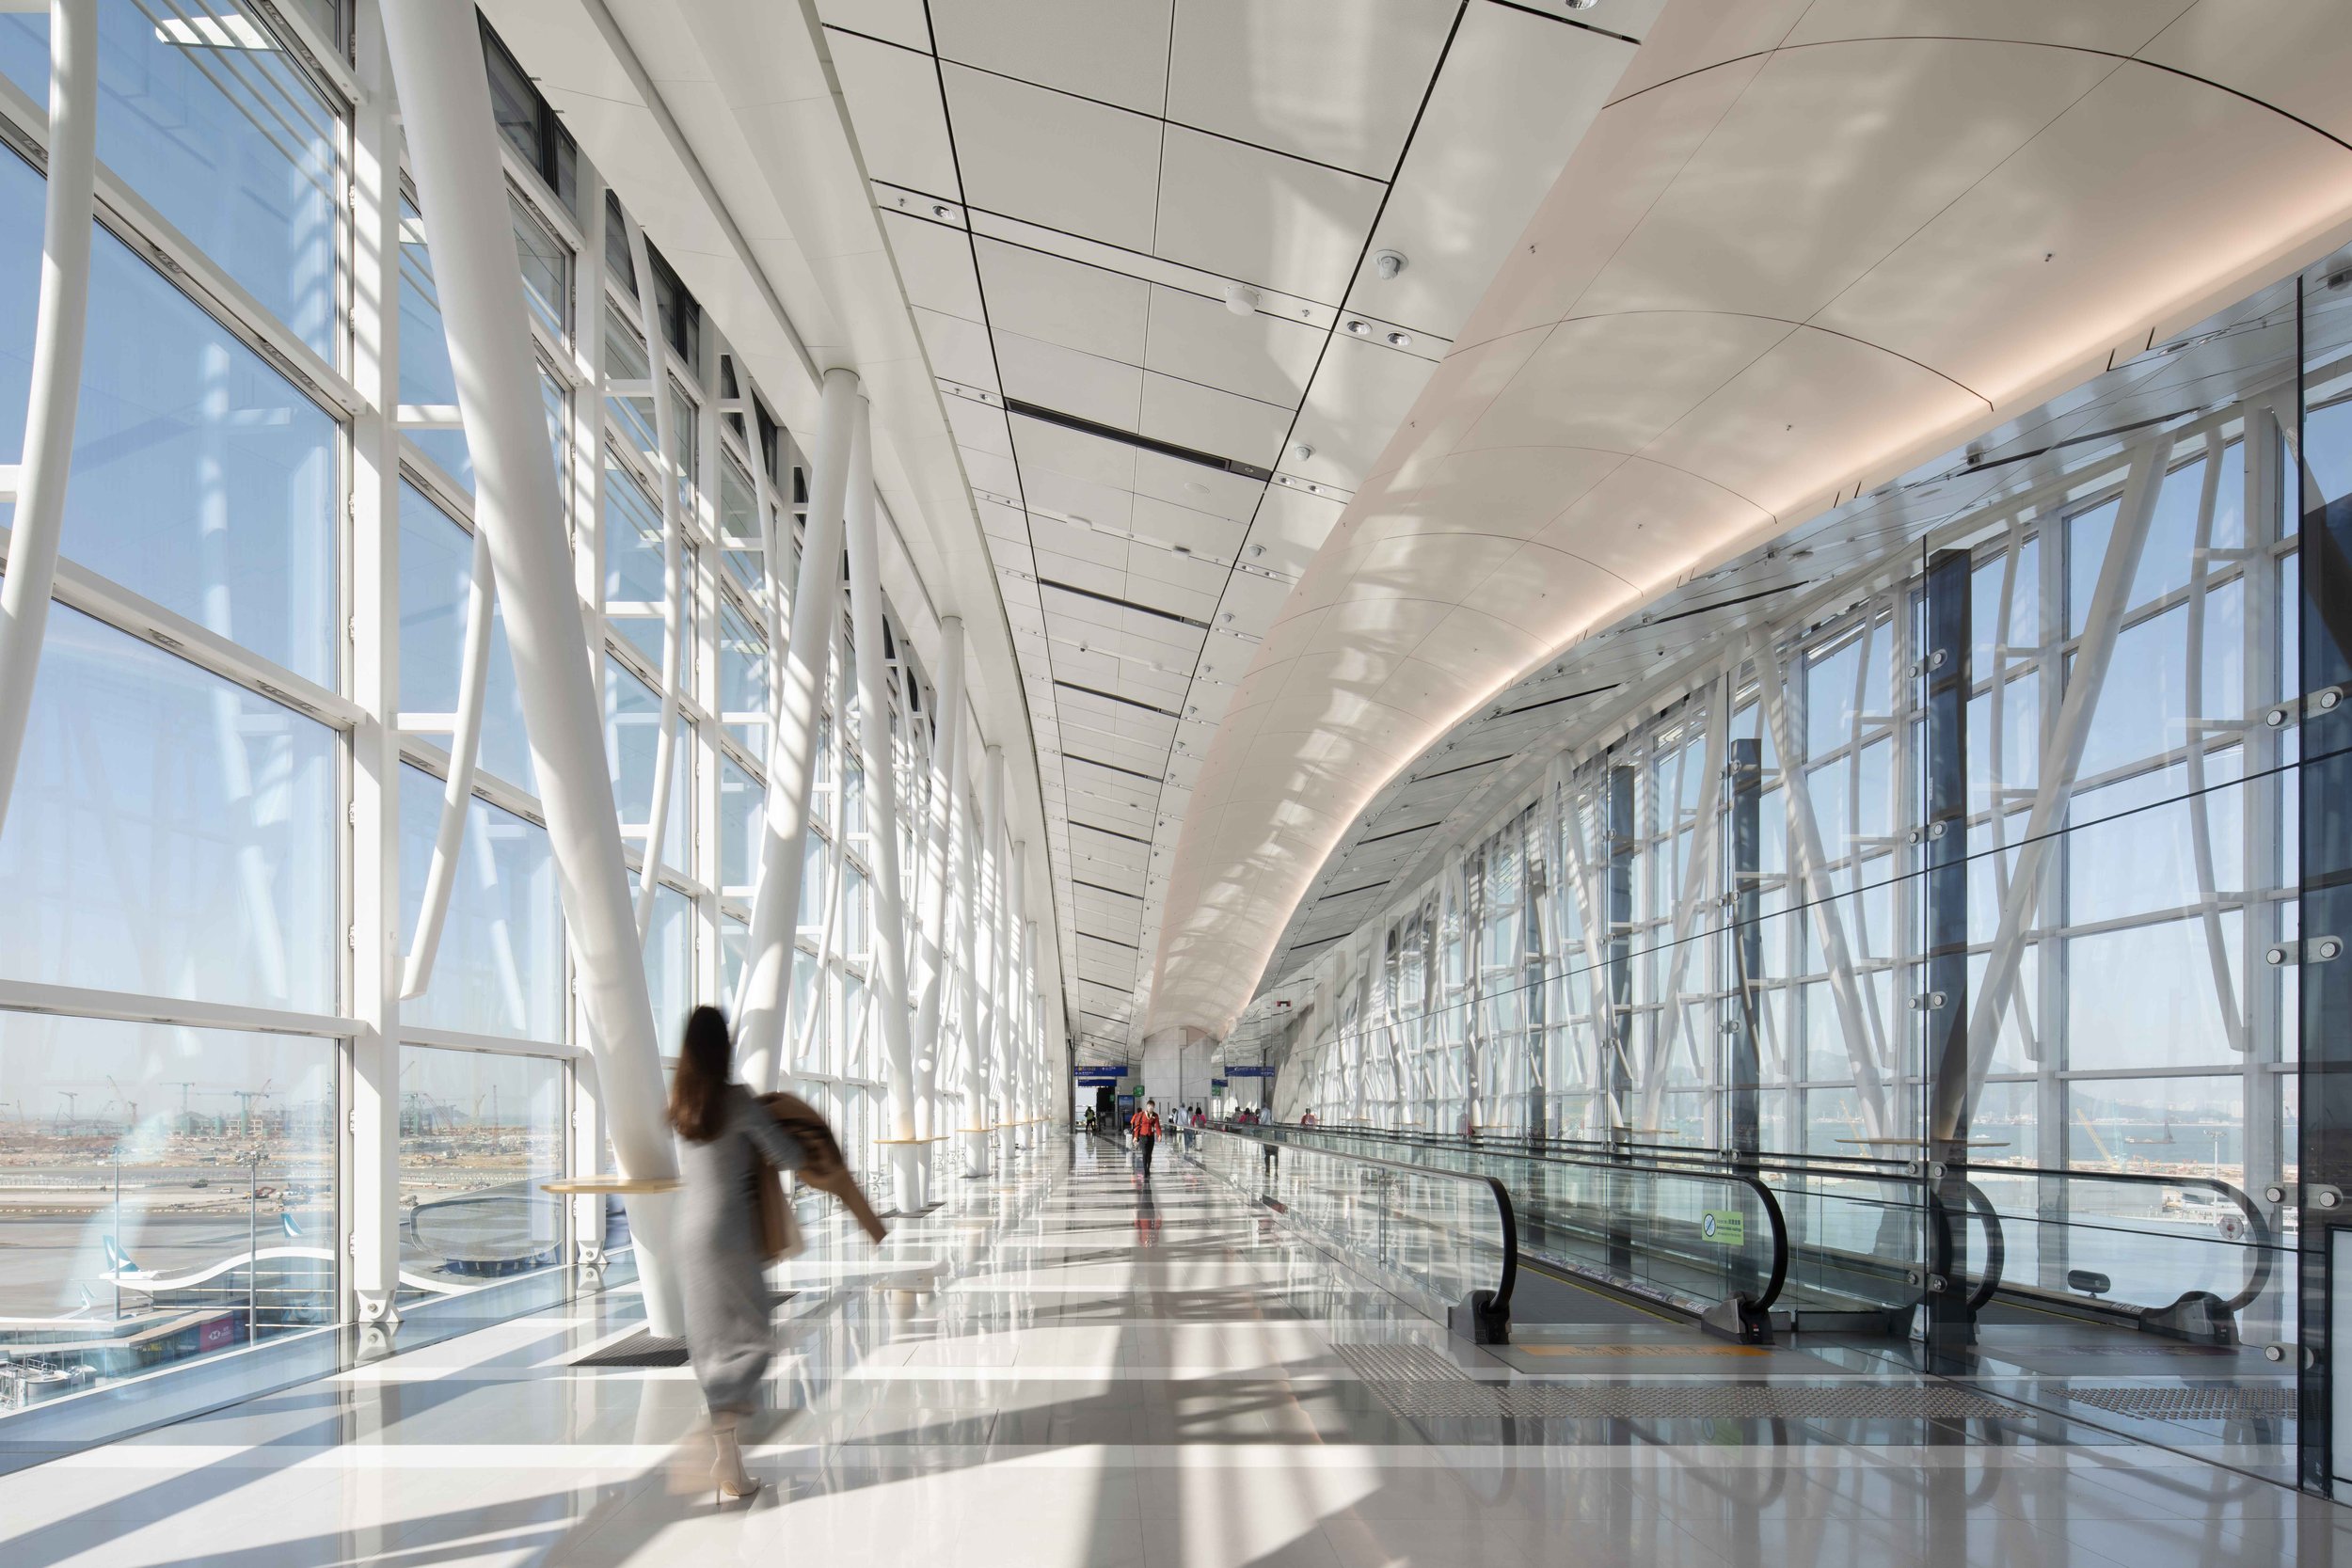  Sky Bridge   Hong Kong International Airport HKIA  Design by / Photographed for Wilkinson Eyre 